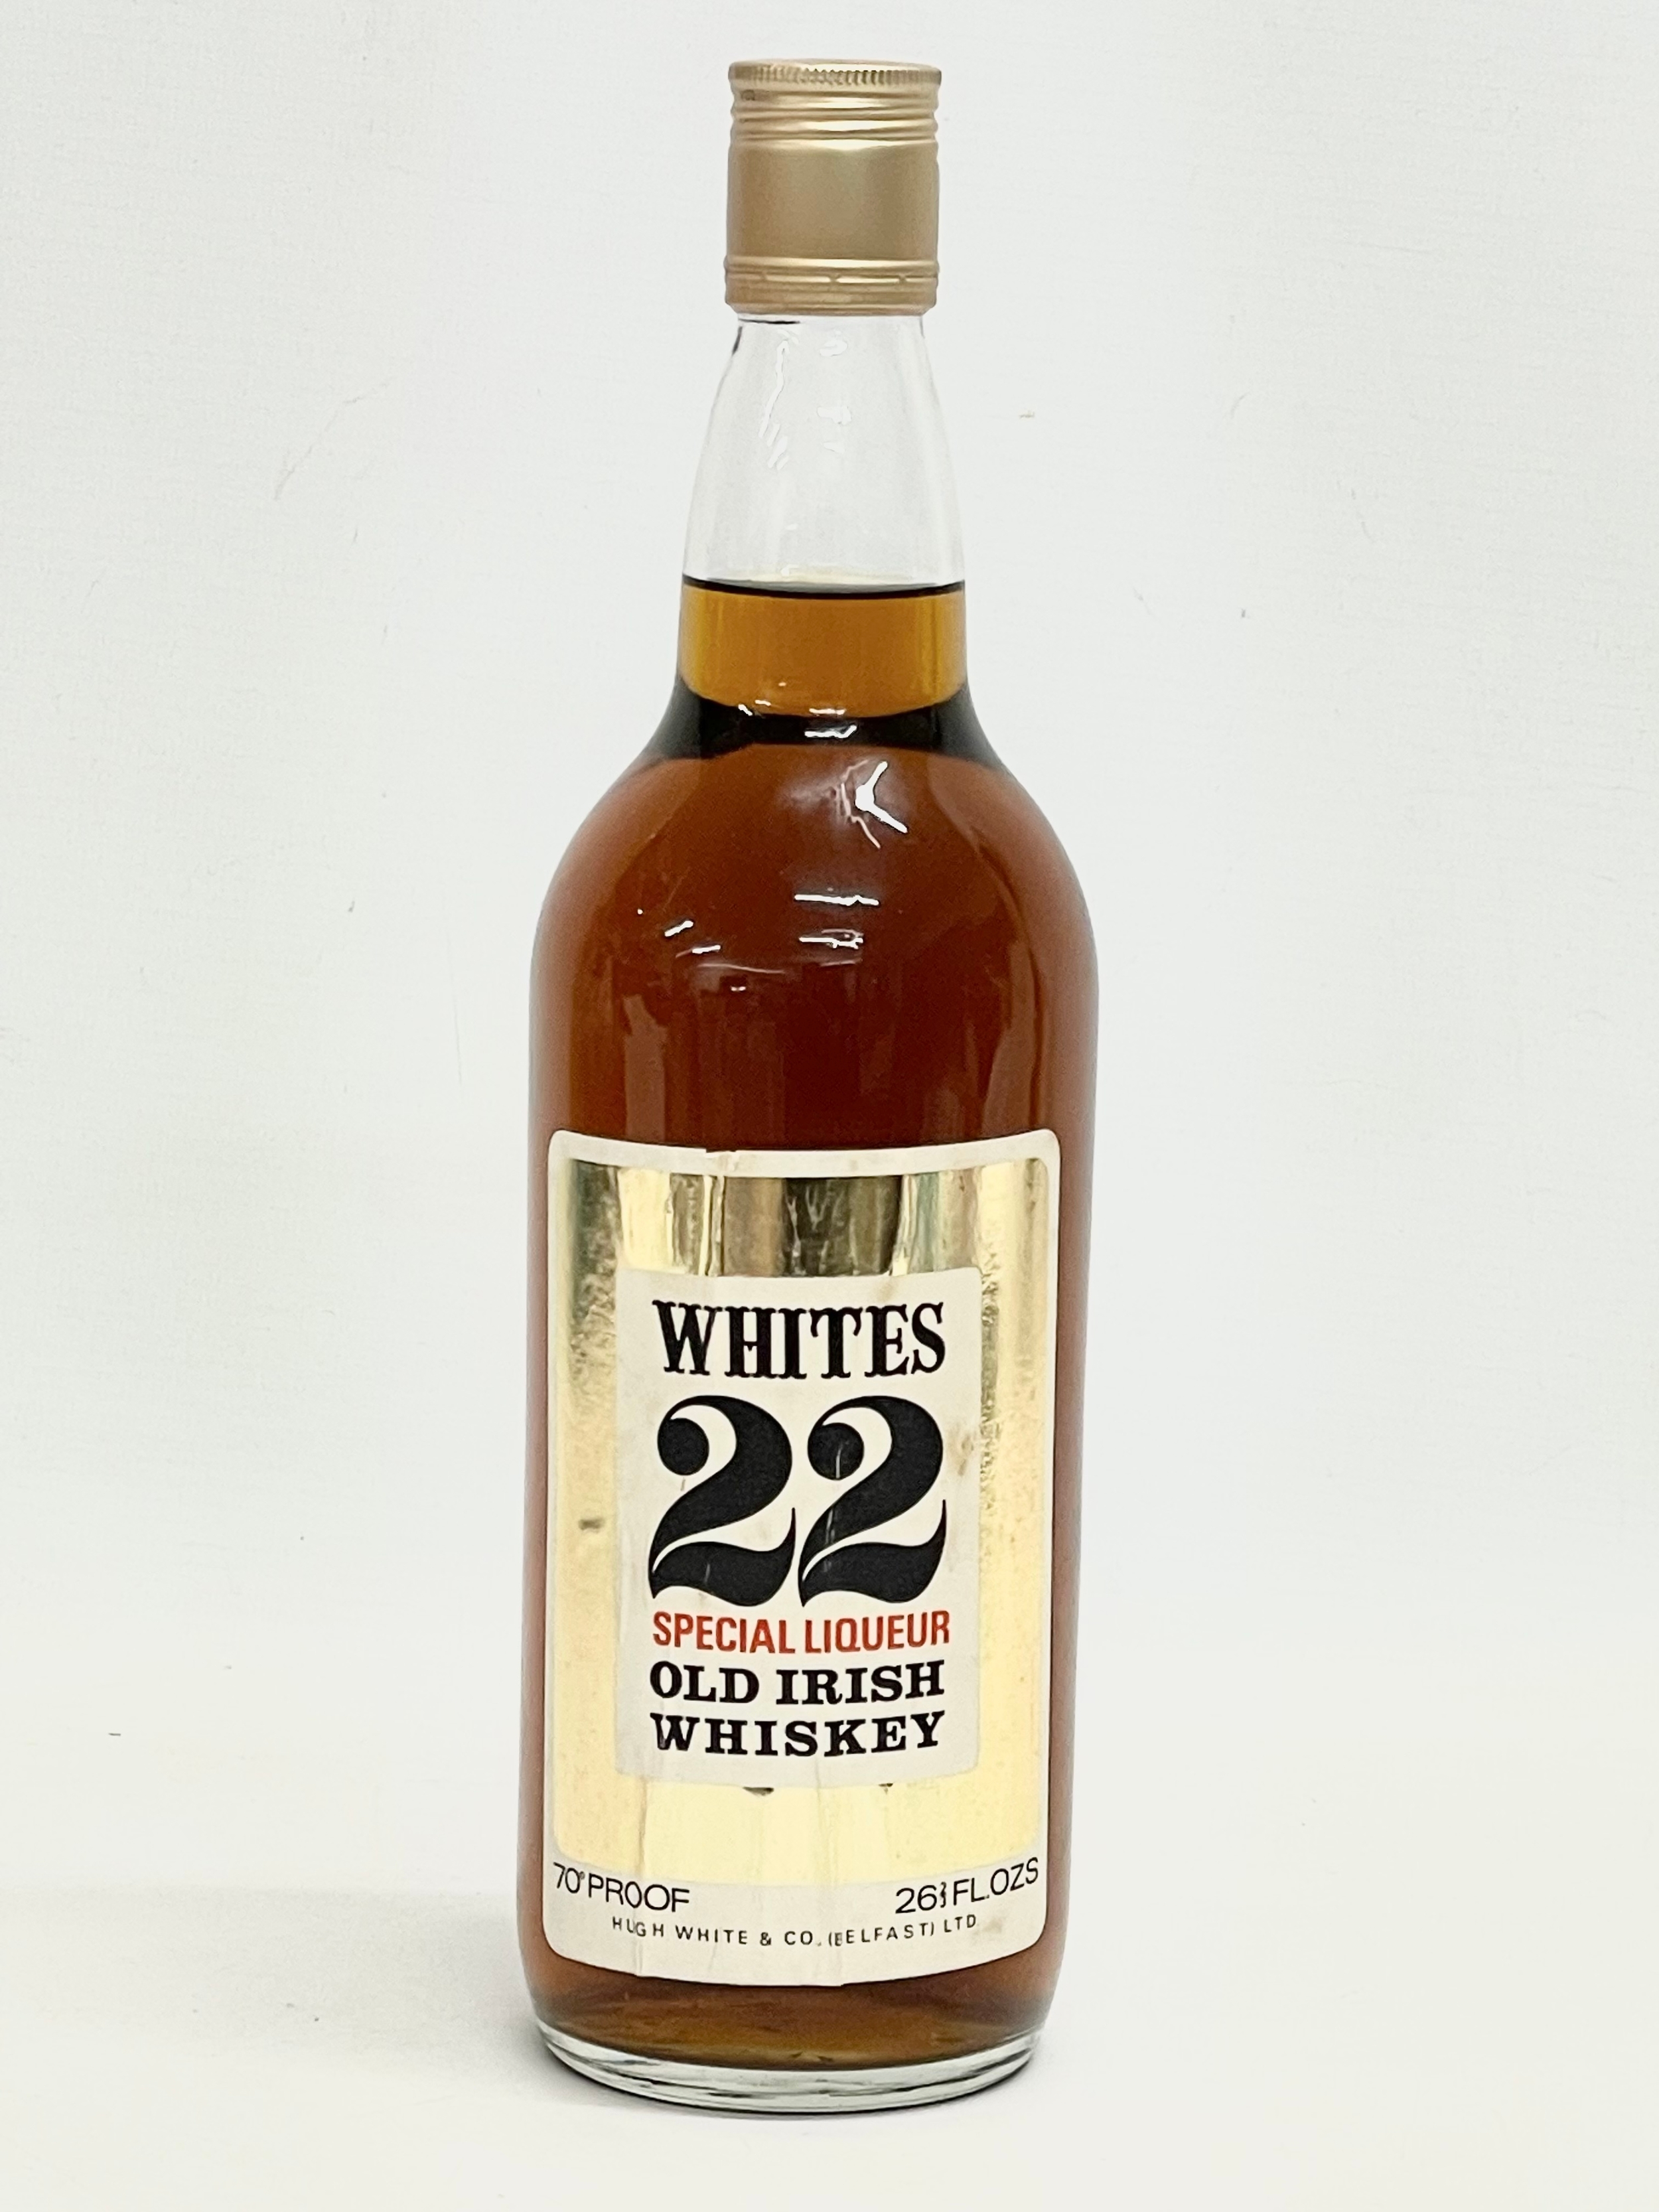 A vintage bottle of Whites 22 Special Liqueur Old Irish Whiskey. 28.5cm